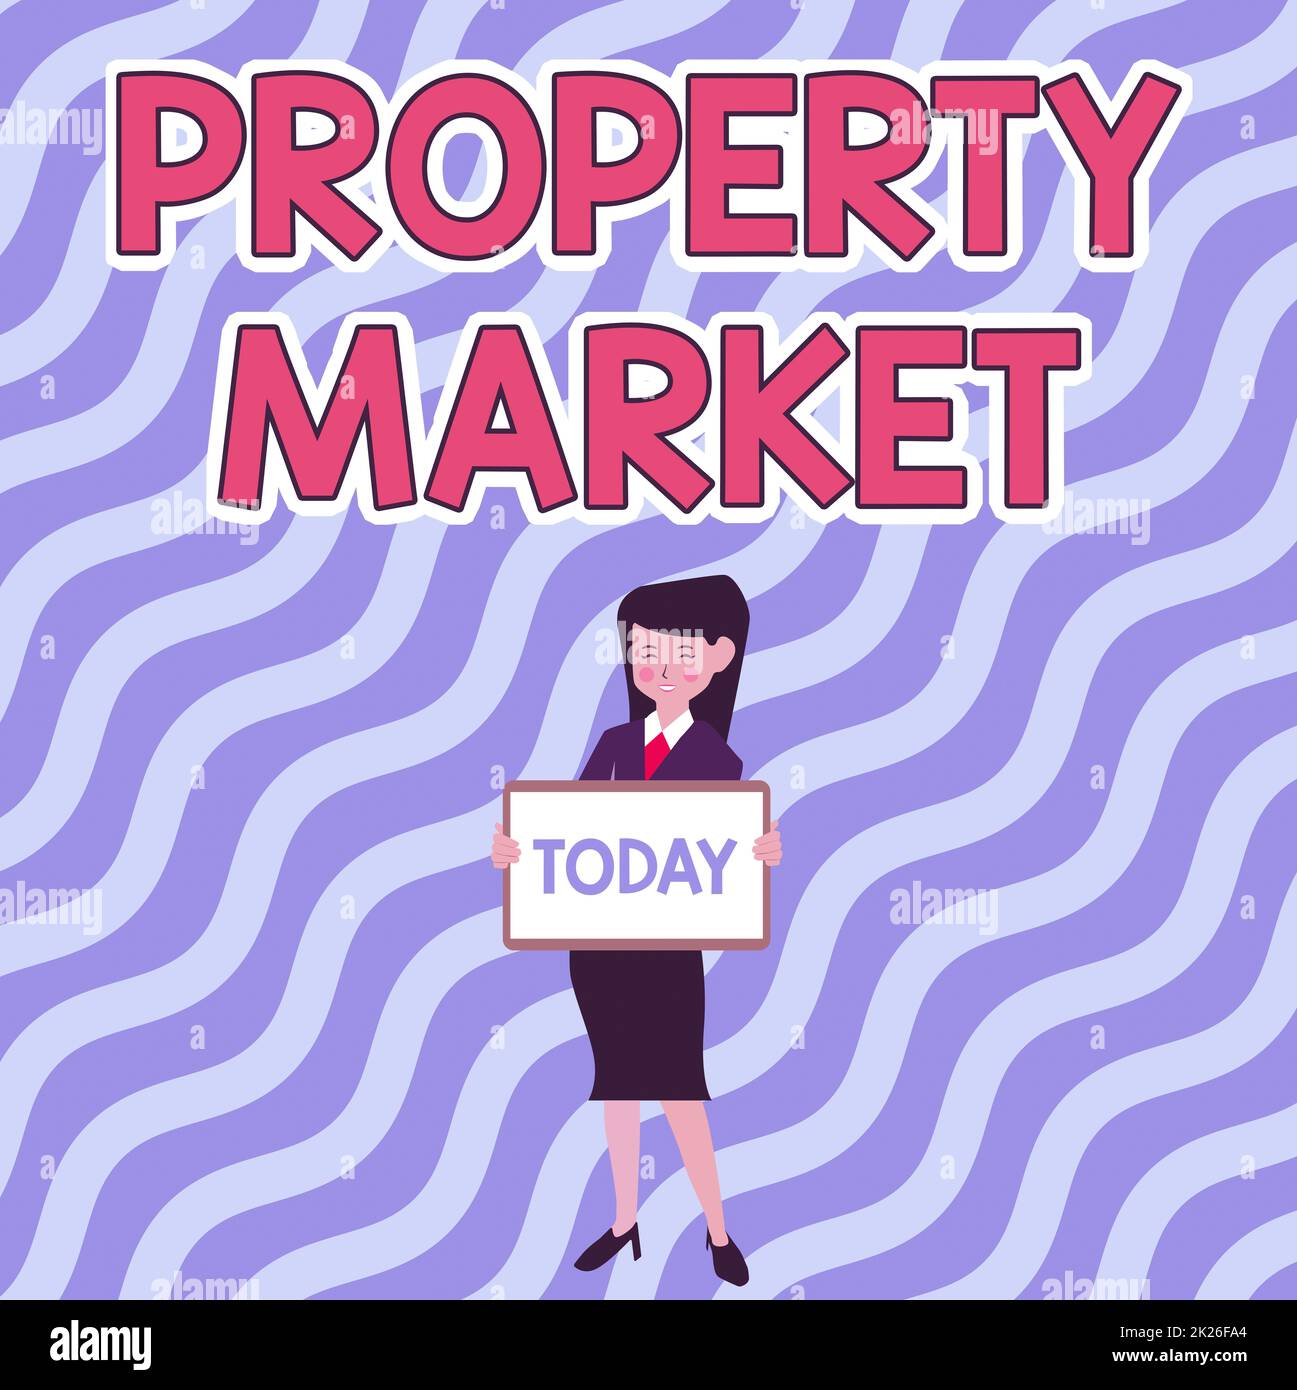 Sign displaying Property Market. Internet Concept the buying and selling of land and buildings Estate market Beautiful Lady Standing Holding Whiteboard Presenting New Announcement. Stock Photo